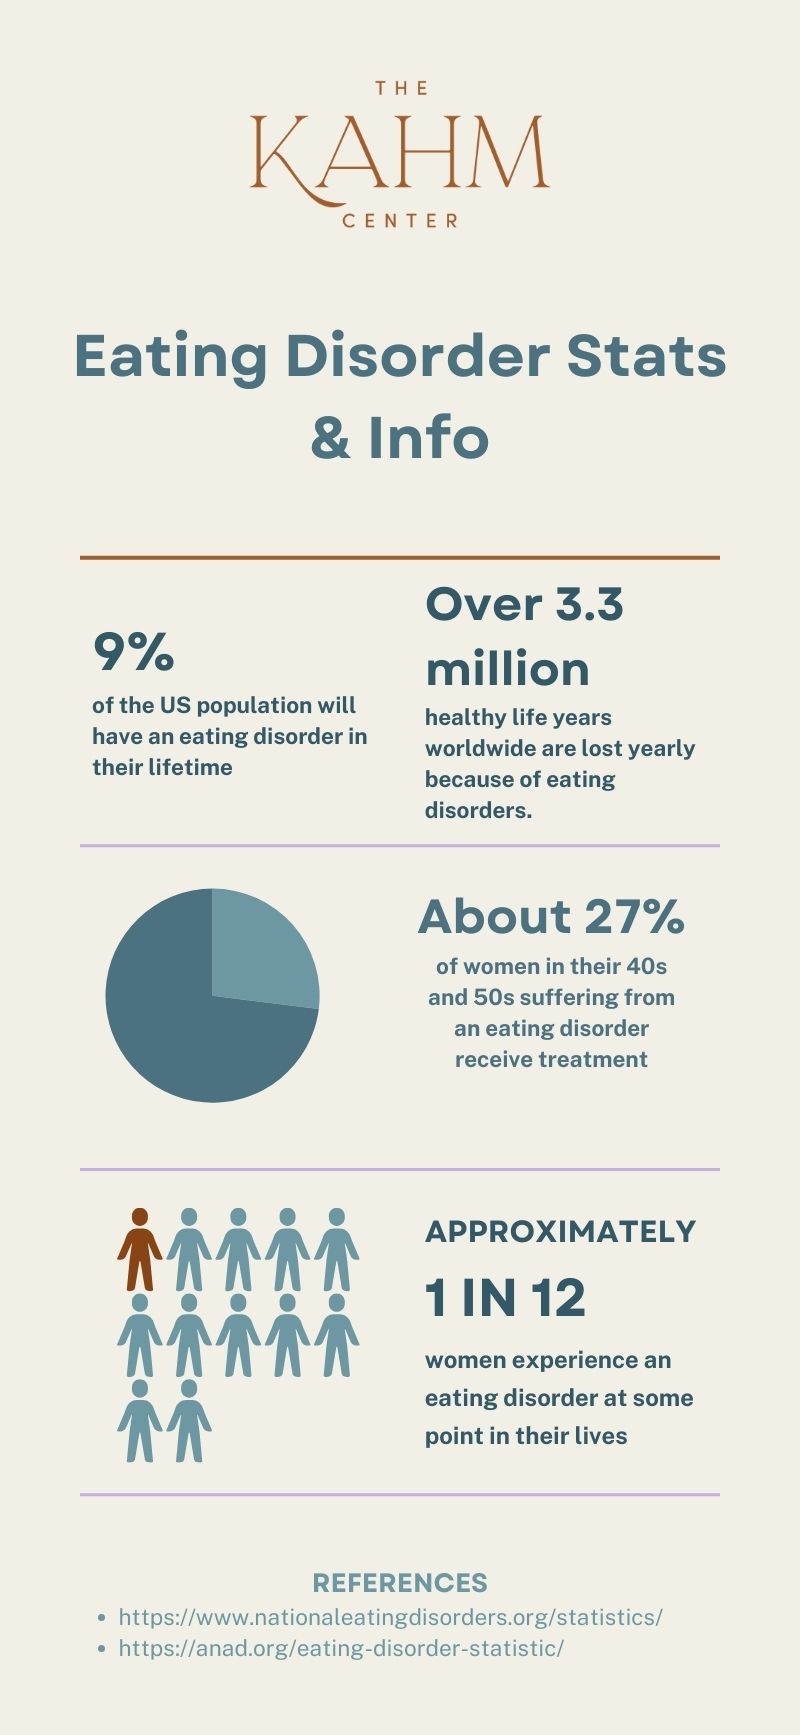 infographic titled "Eating Disorder Stats & Info" from The KAHM Center provides several key statistics about eating disorders. It states that 9% of the US population will experience an eating disorder in their lifetime. Additionally, over 3.3 million healthy life years are lost worldwide yearly due to eating disorders. The infographic highlights that only 27% of women in their 40s and 50s who suffer from an eating disorder receive treatment. It also notes that approximately 1 in 12 women will experience an eating disorder at some point in their lives. References for the data are provided from the National Eating Disorders Association and ANAD.org. The design includes text, icons, and a pie chart to visually convey the information.